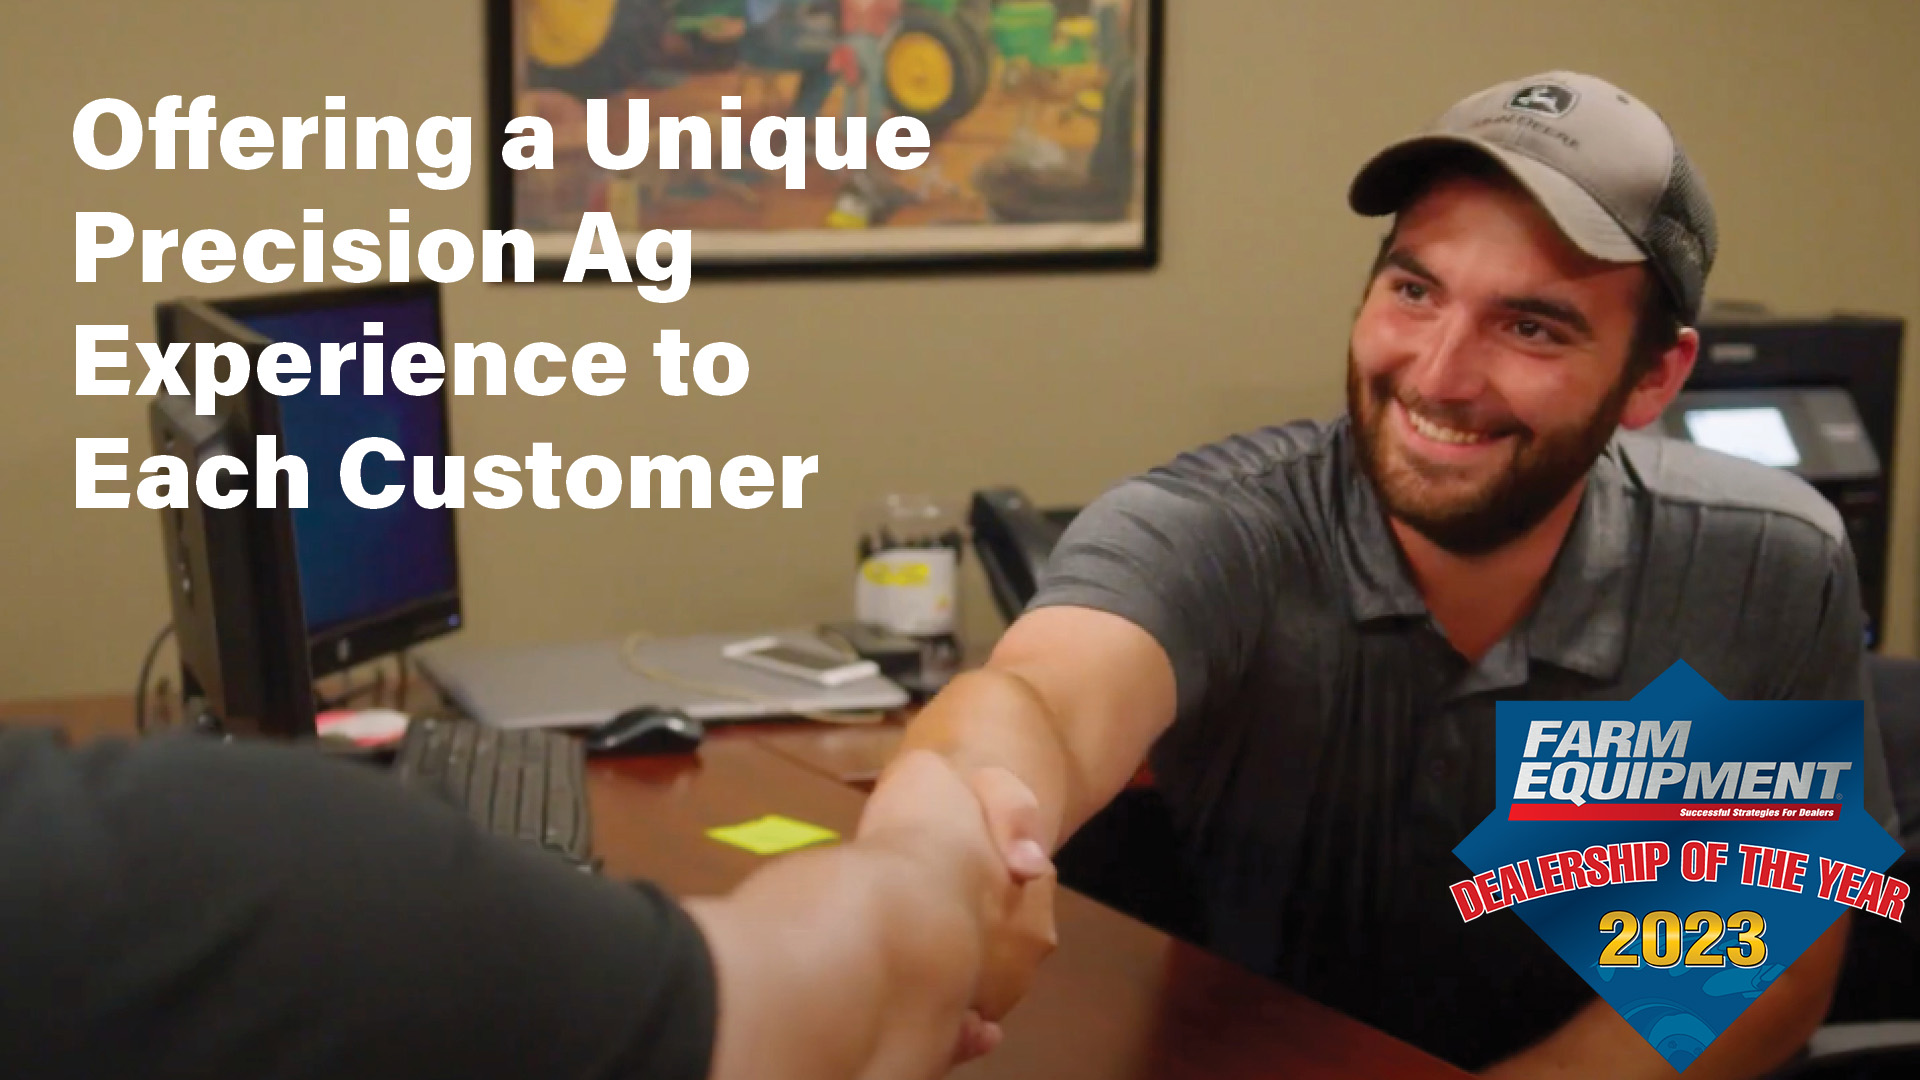 Offering-a-Unique-Precision-Ag-Experience-to-Each-Customer.jpg